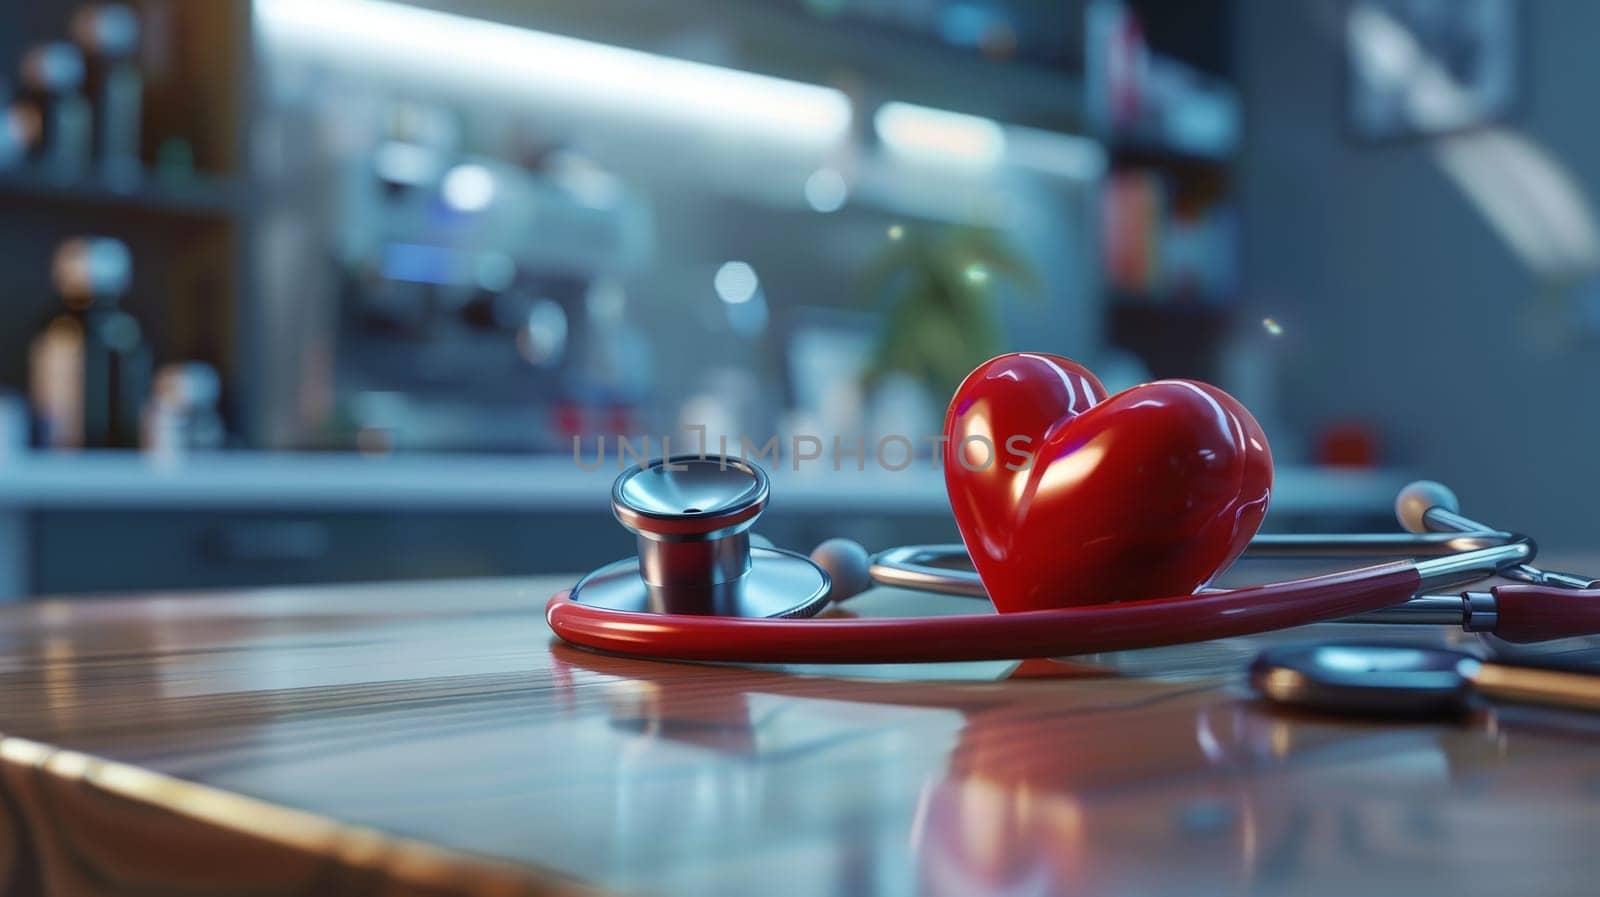 A stethoscope is placed on a table next to a red heart. Concept of care and concern for someone's health